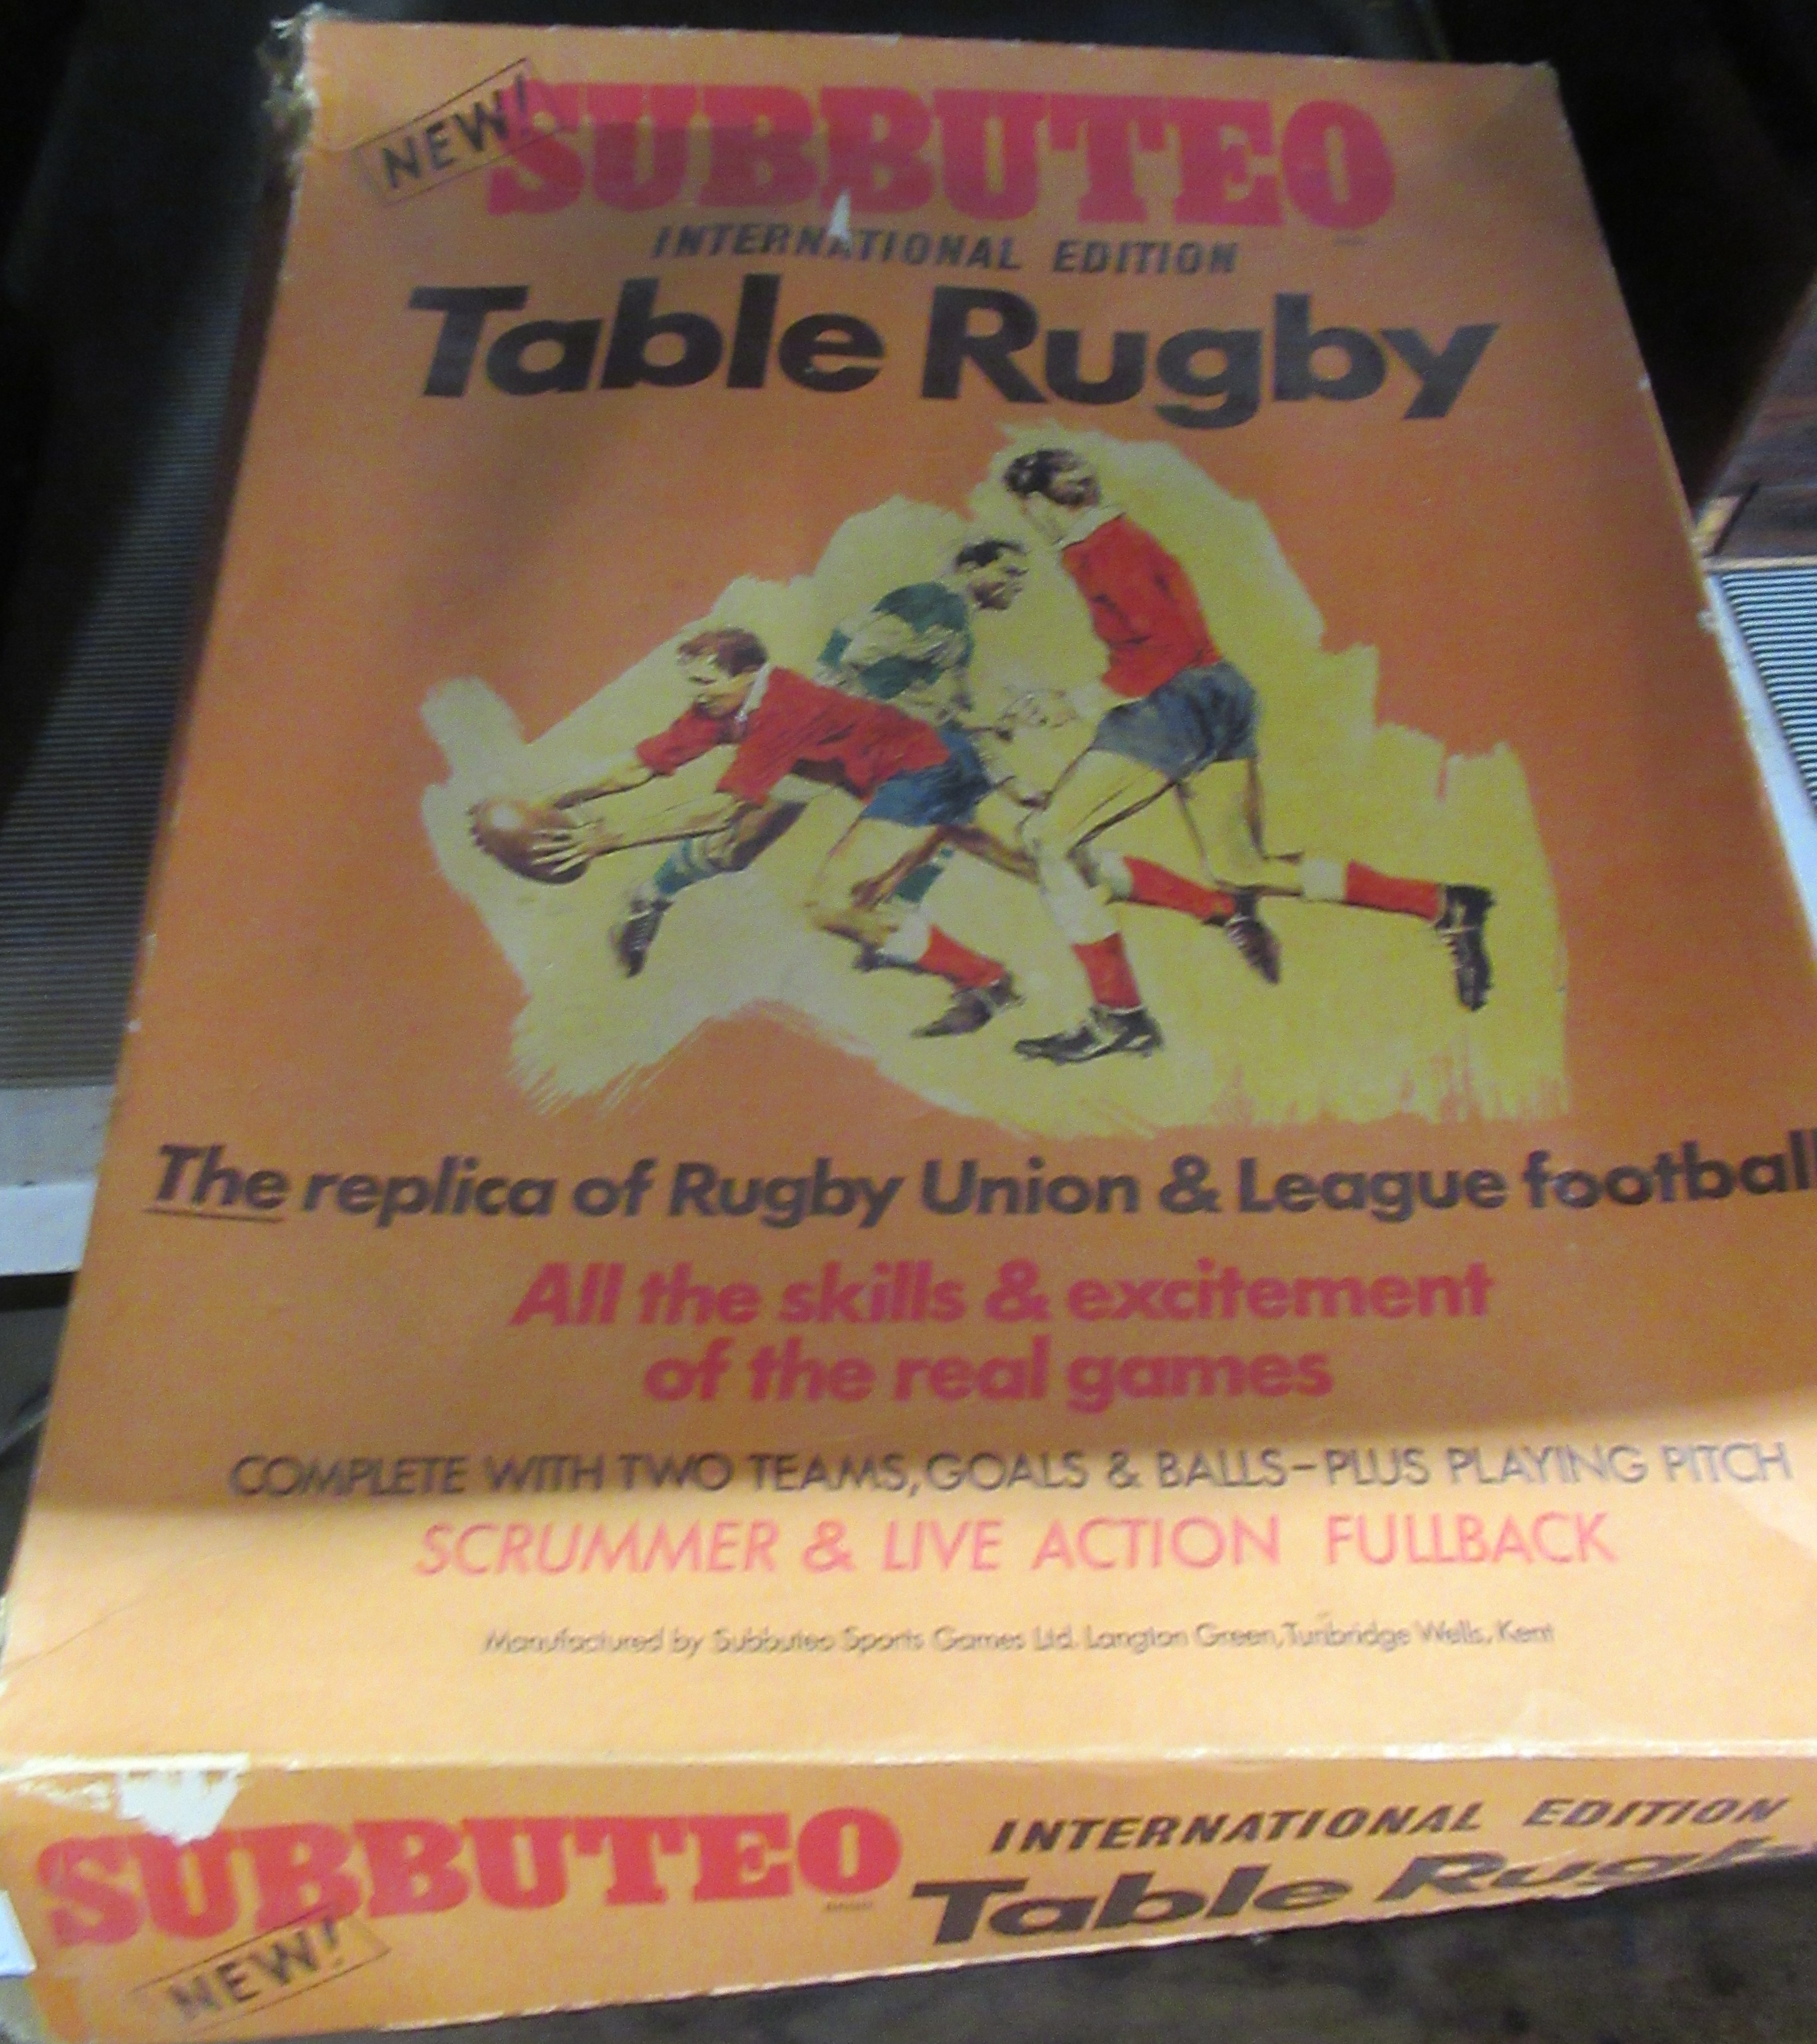 A Subbuteo Table Rugby game